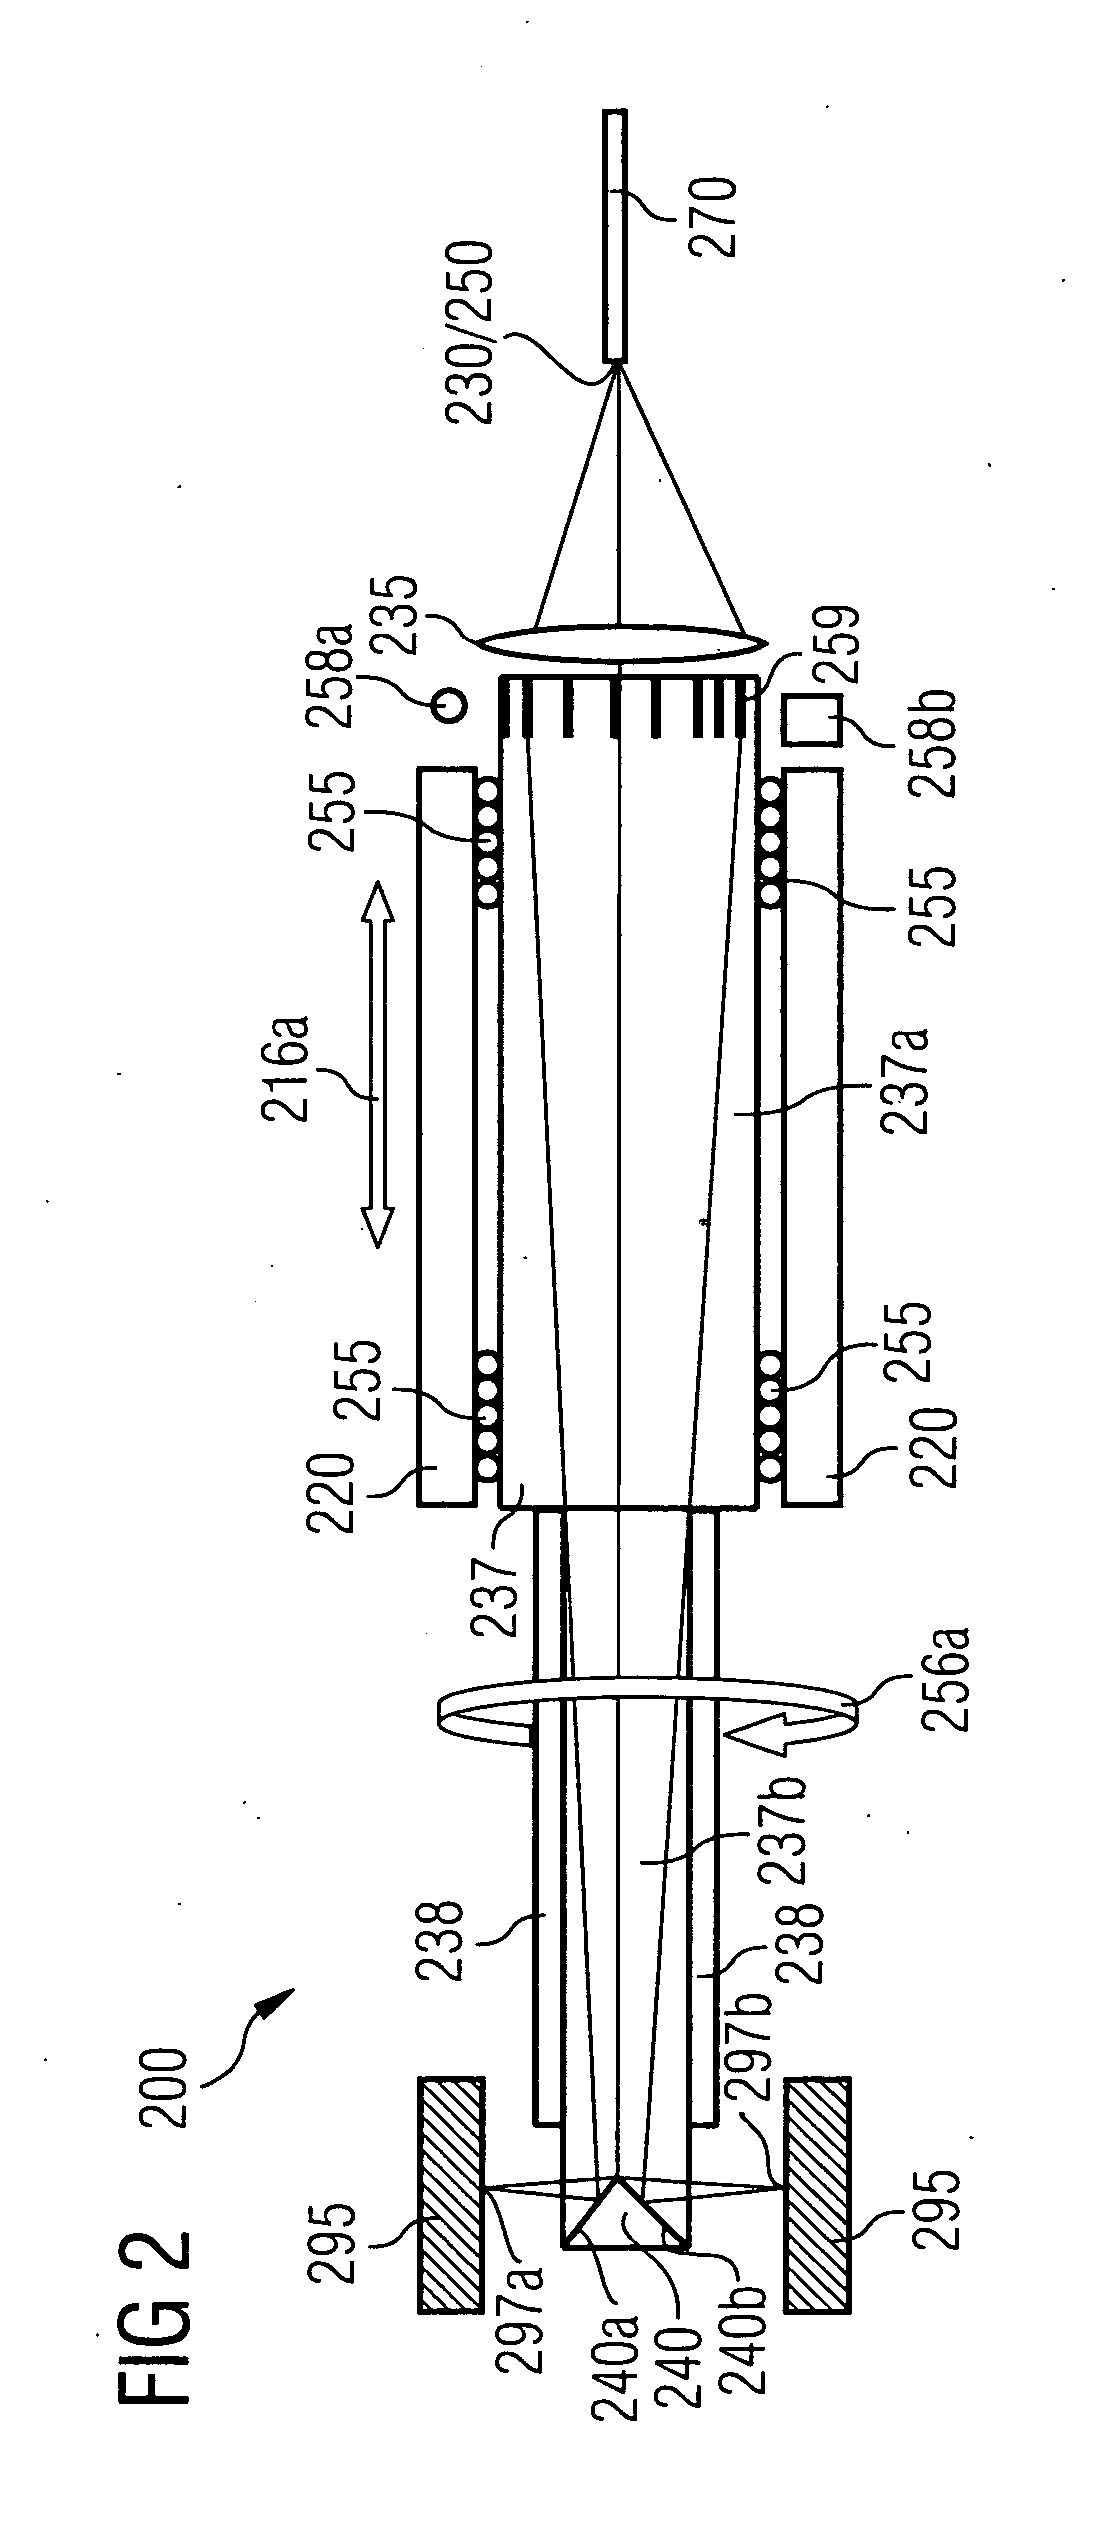 Optical measuring device for measuring a cavity